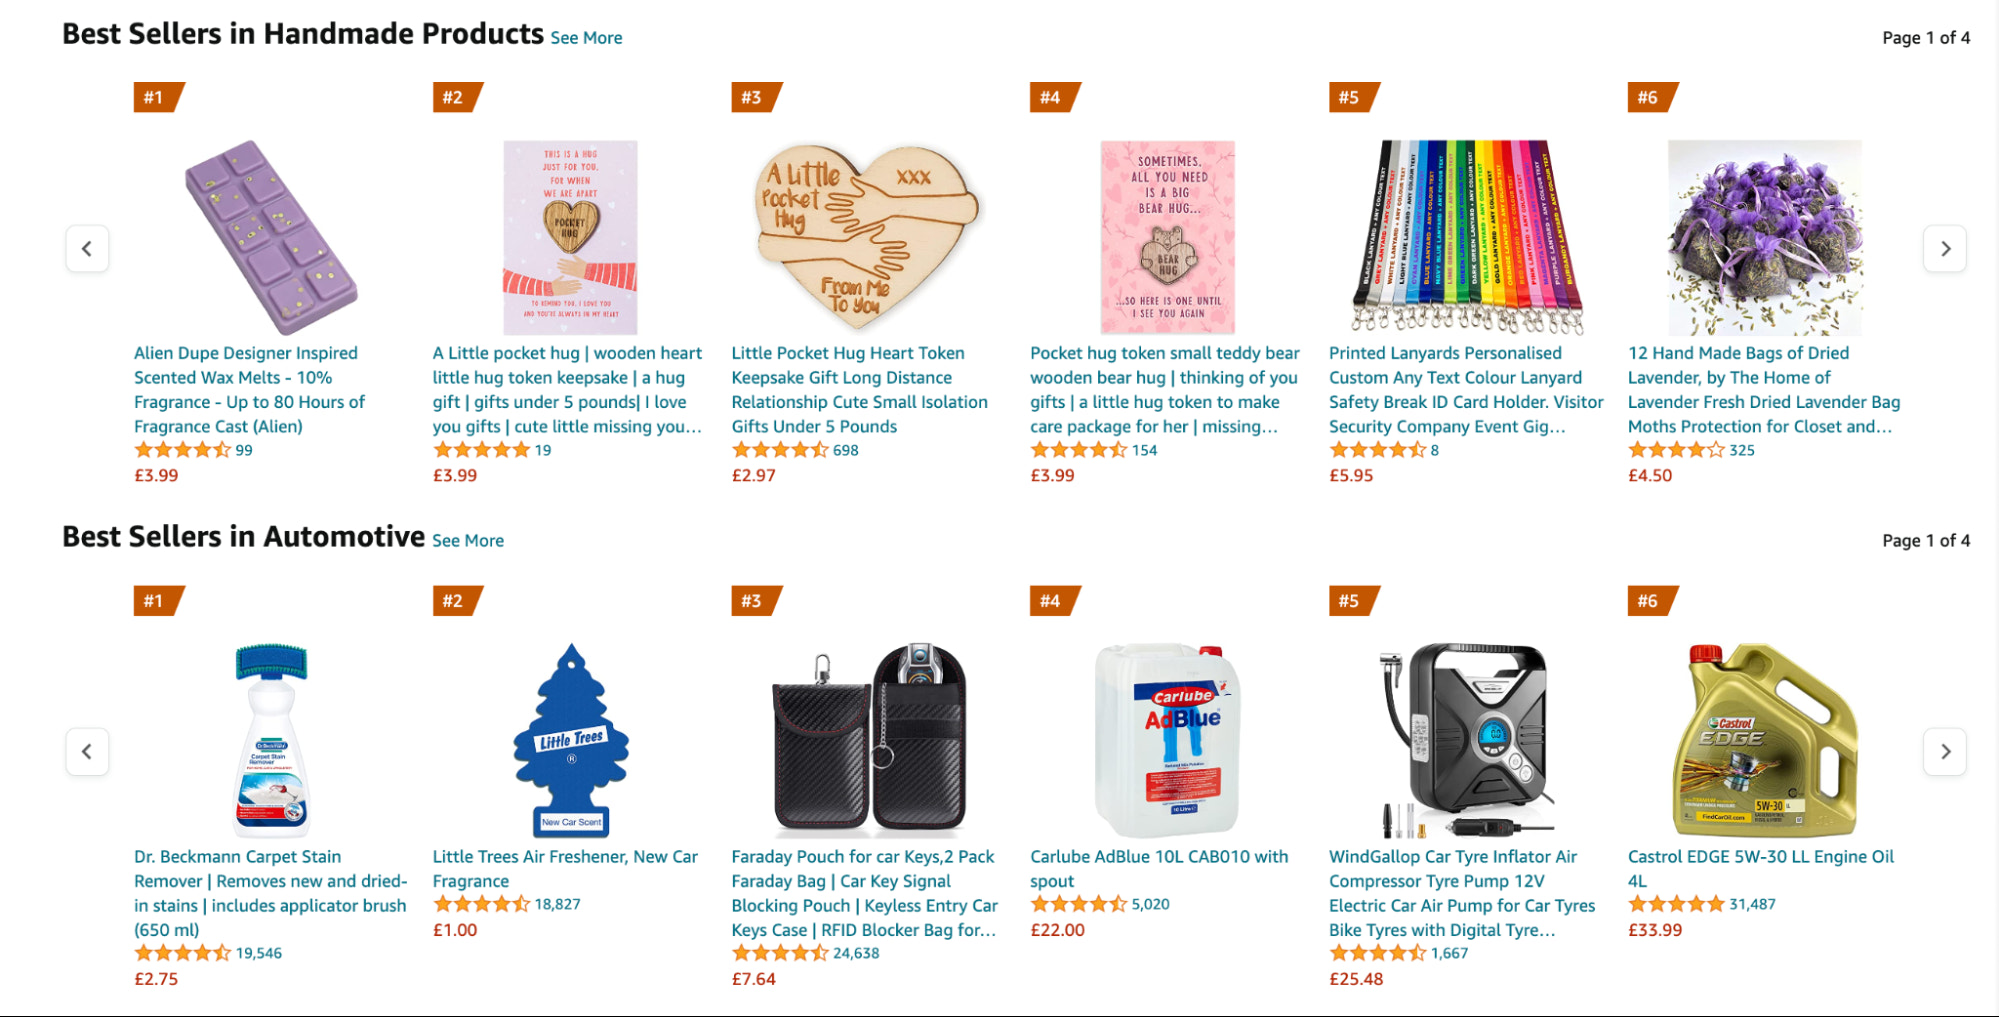 Amazon bestsellers for handmade and automotive products.